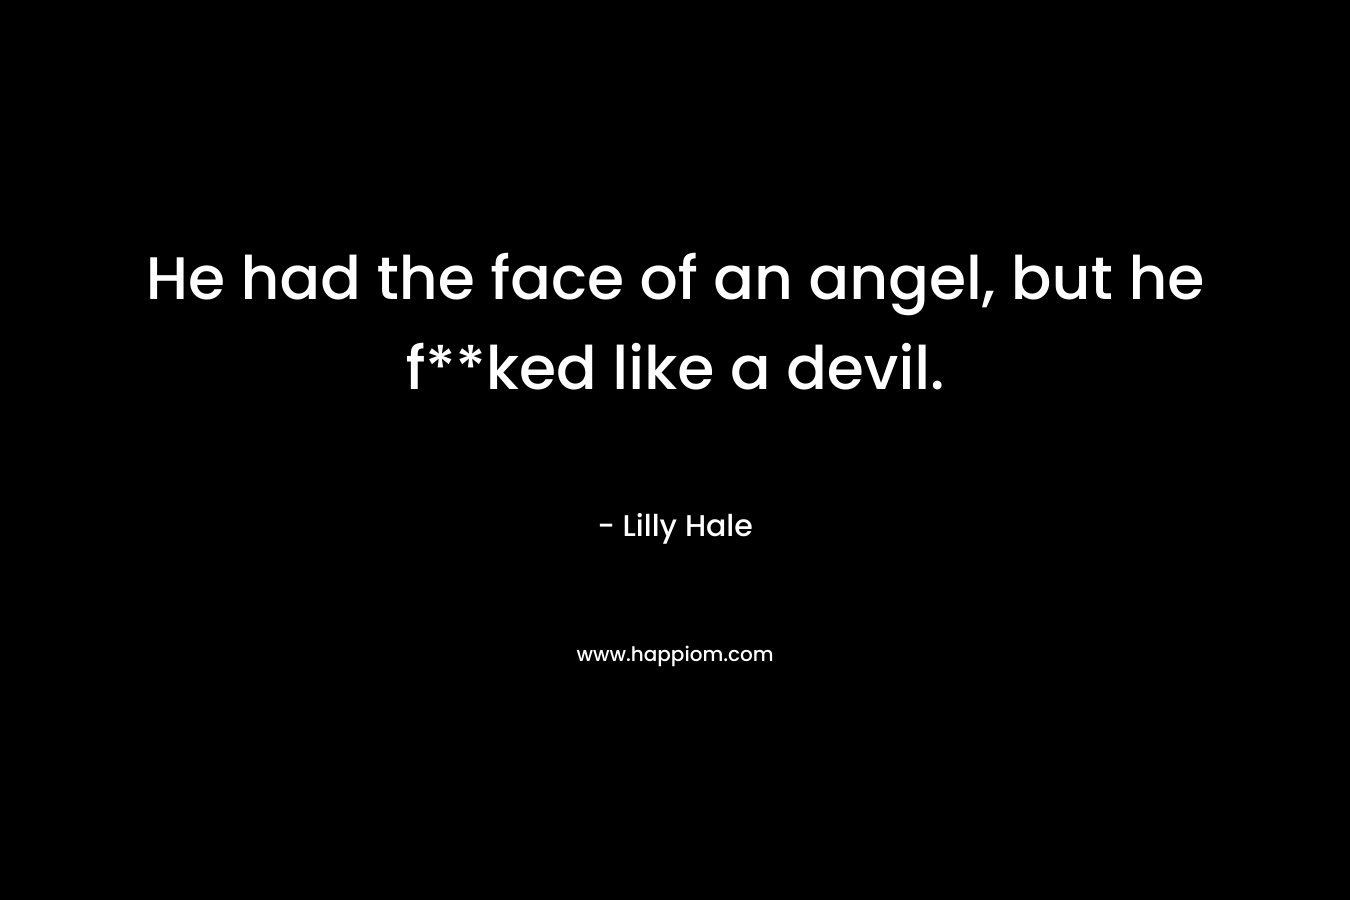 He had the face of an angel, but he f**ked like a devil. – Lilly Hale